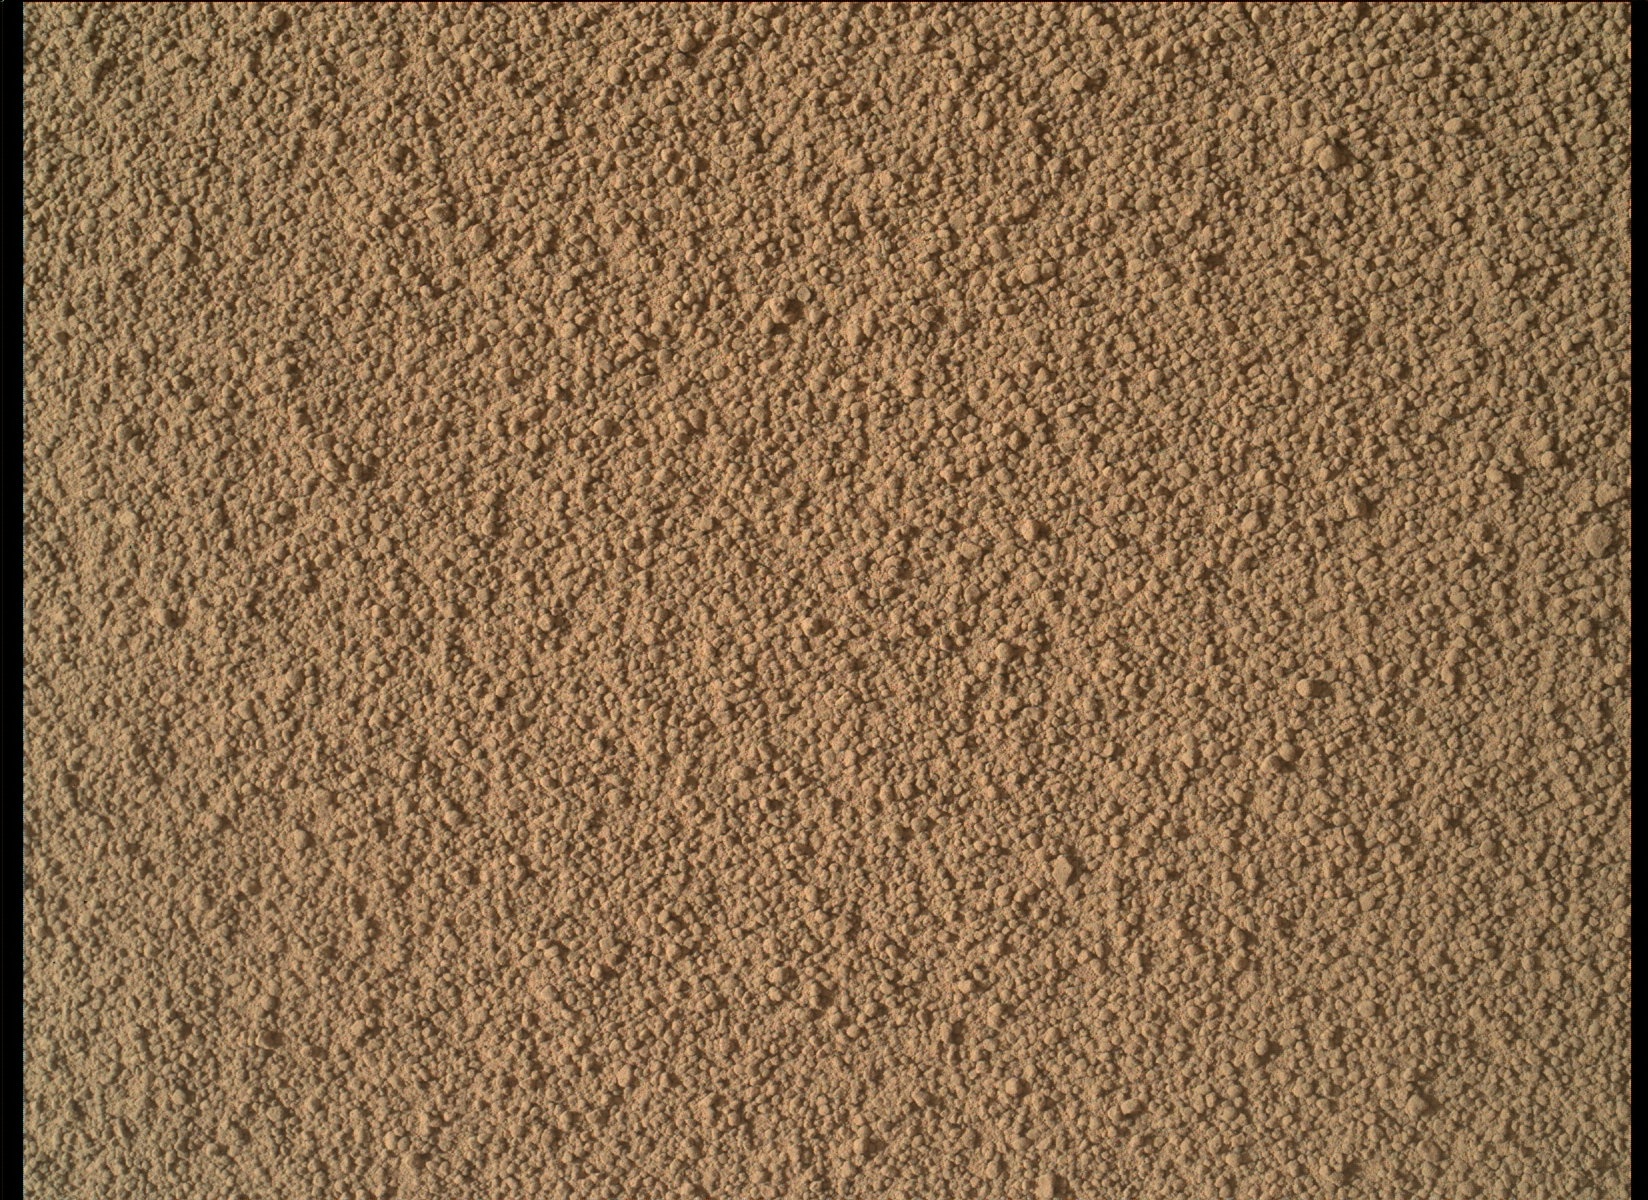 Nasa's Mars rover Curiosity acquired this image using its Mars Hand Lens Imager (MAHLI) on Sol 58